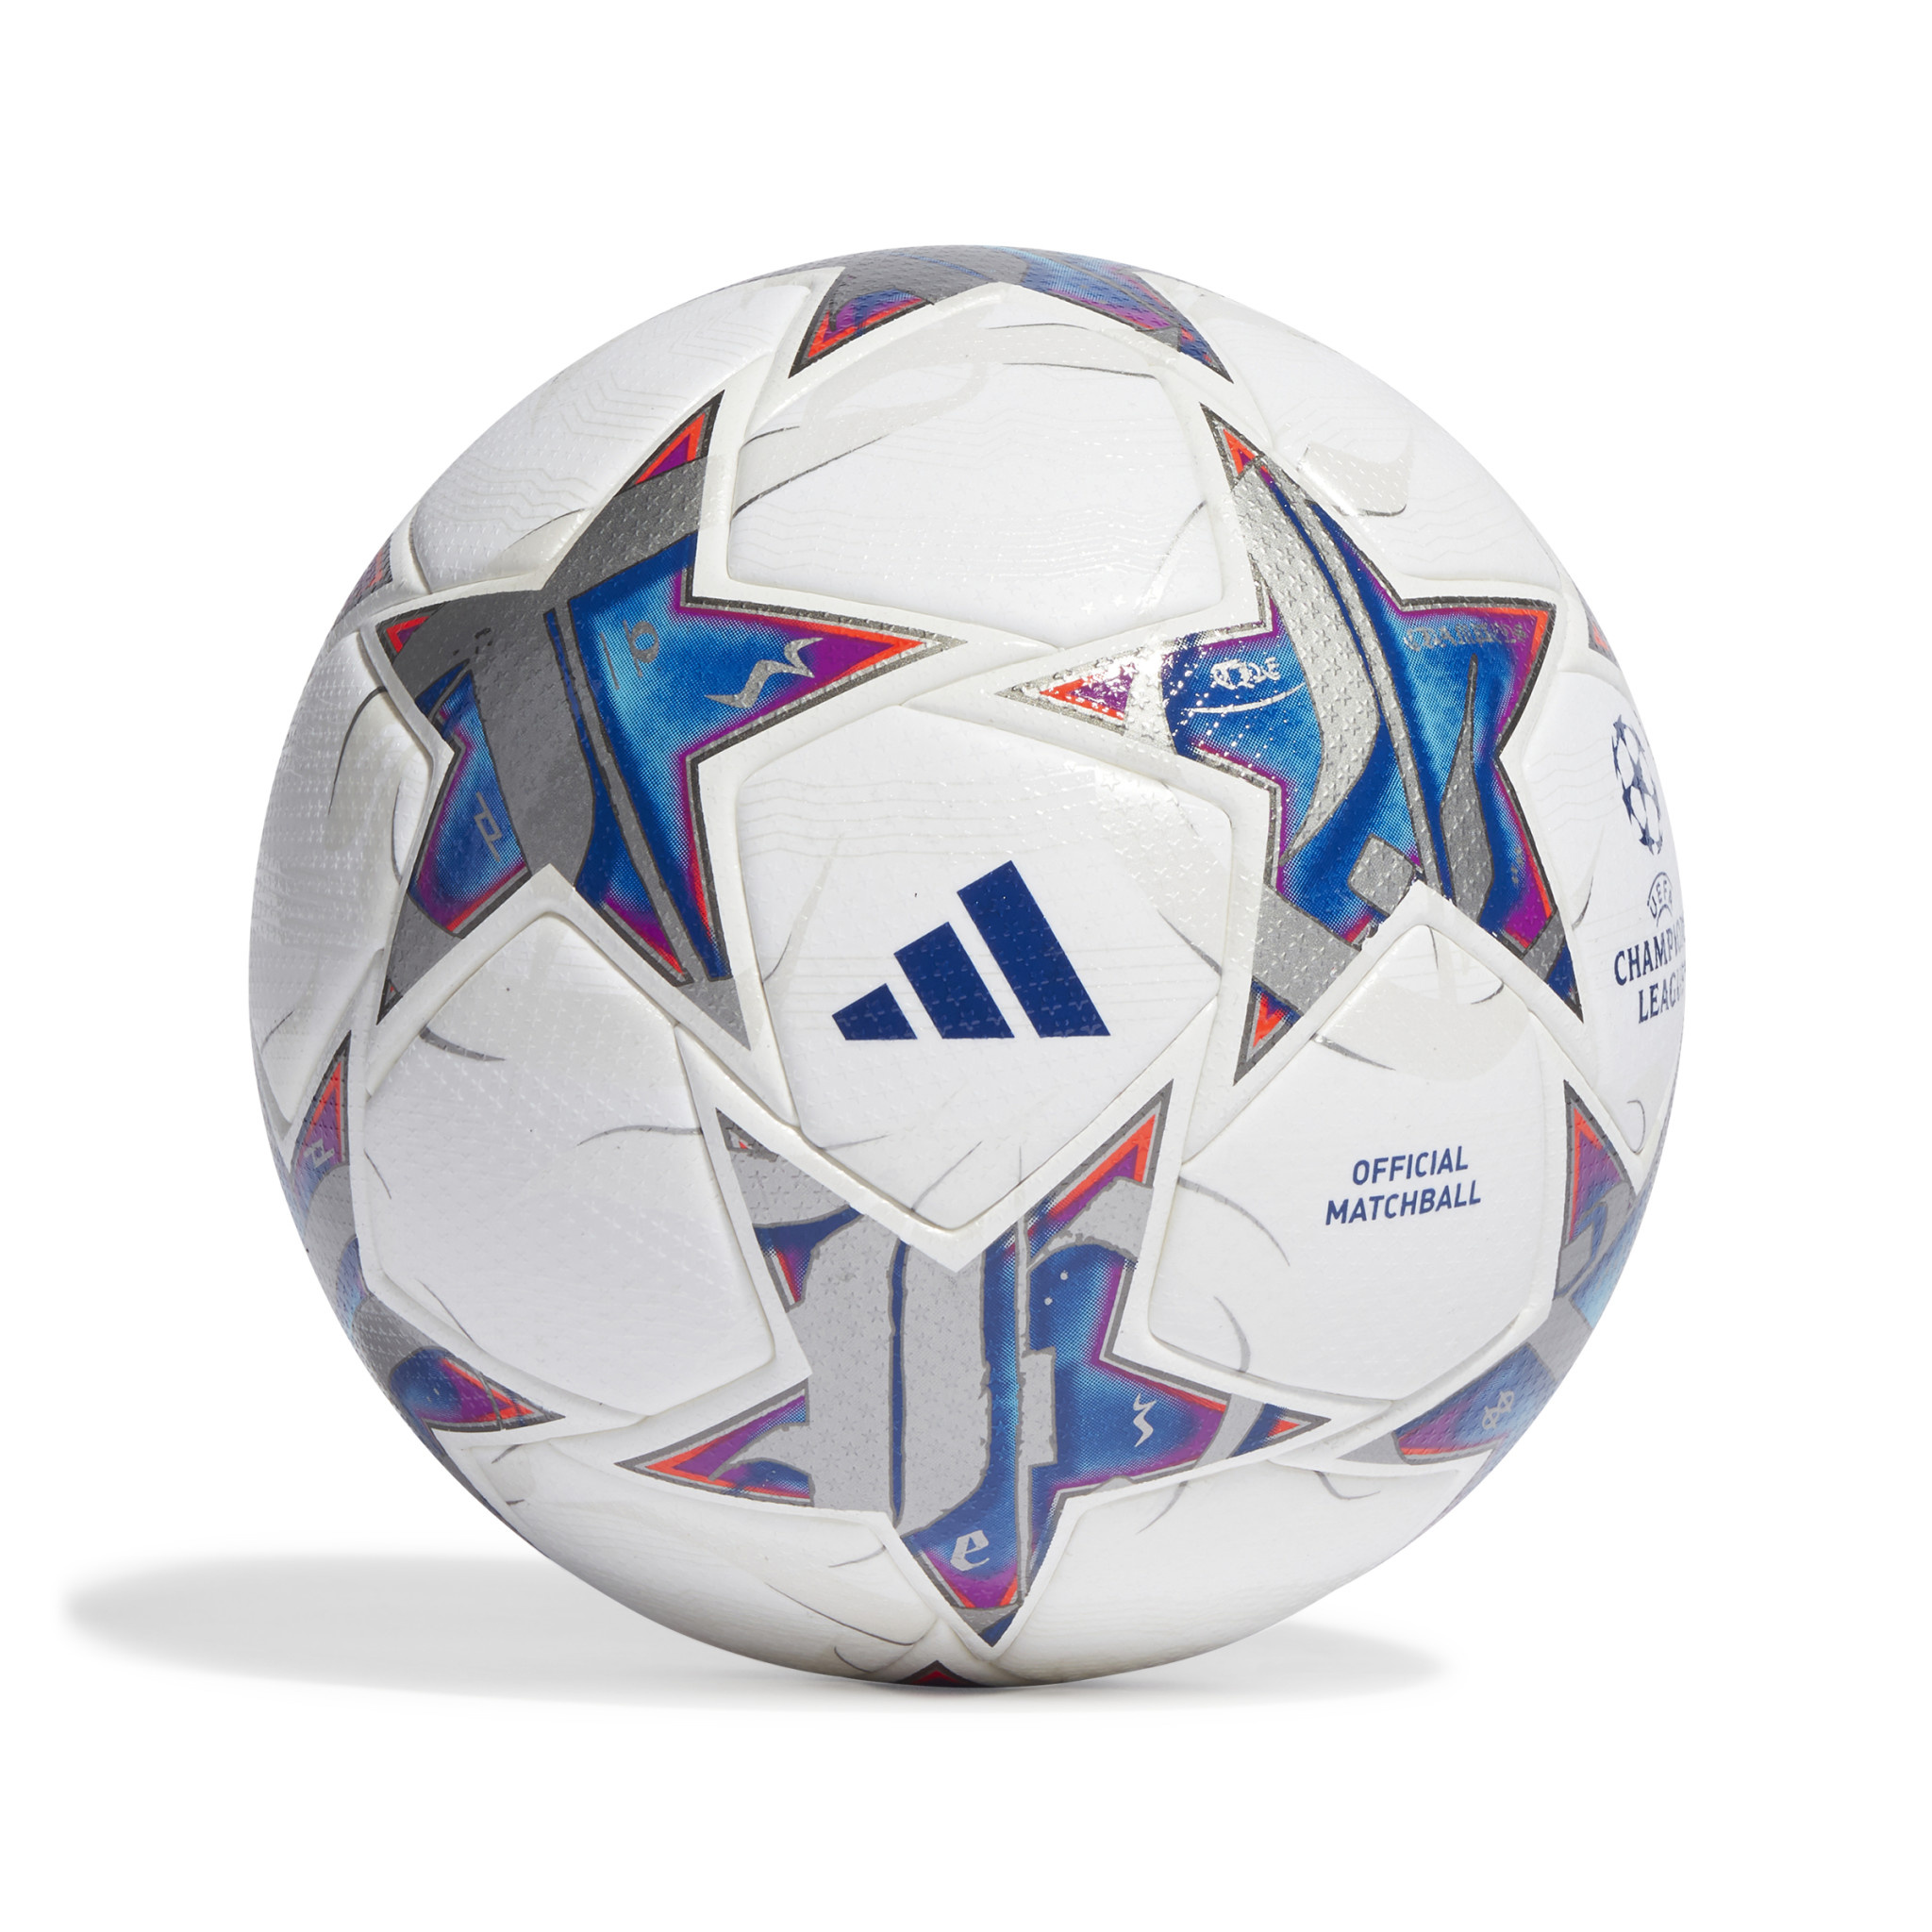 Buy adidas Brazuca Official Match Football, Size 5 Online at Low